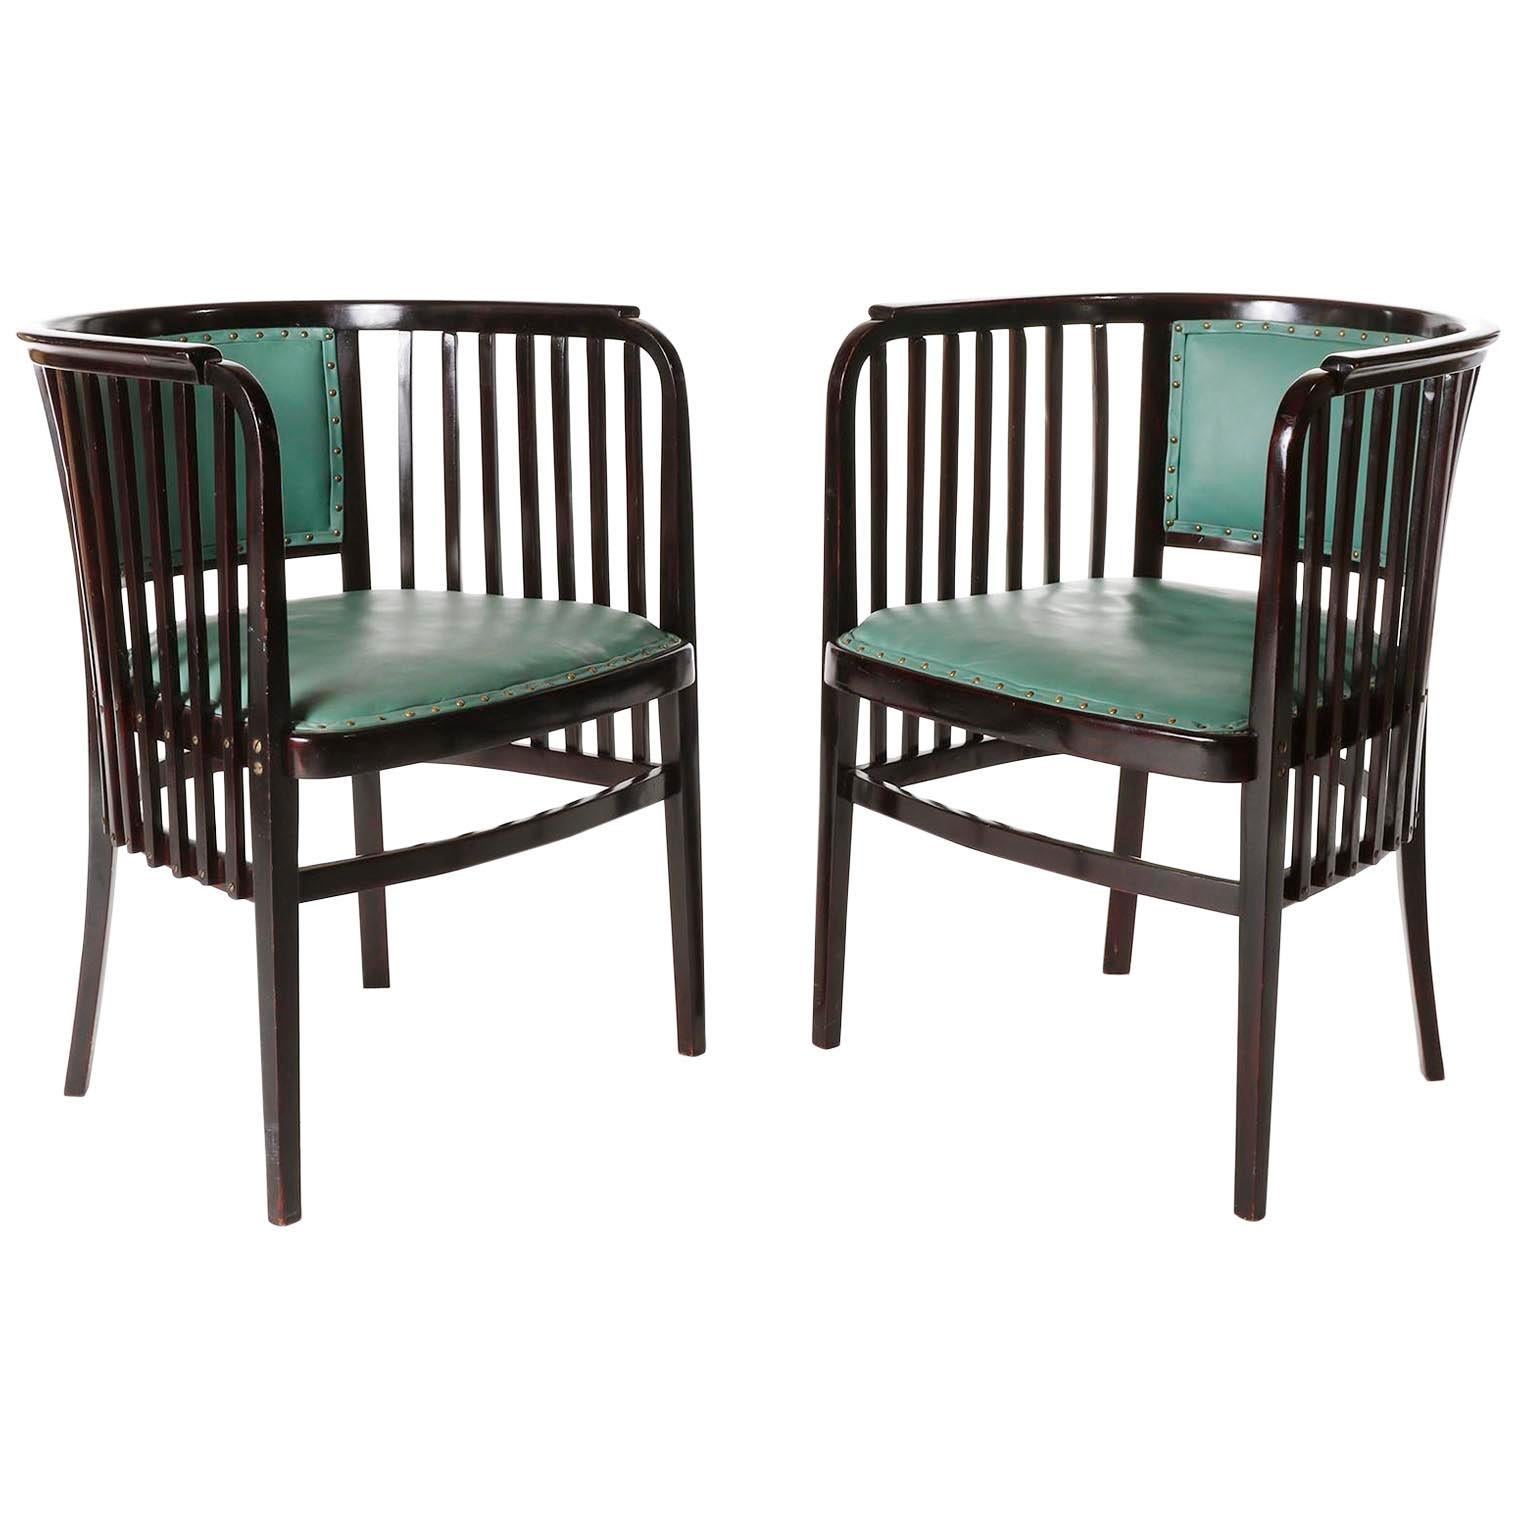 Pair of Armchairs Chairs Marcel Kammerer, Thonet, Turquoise Green Leather, 1910 For Sale